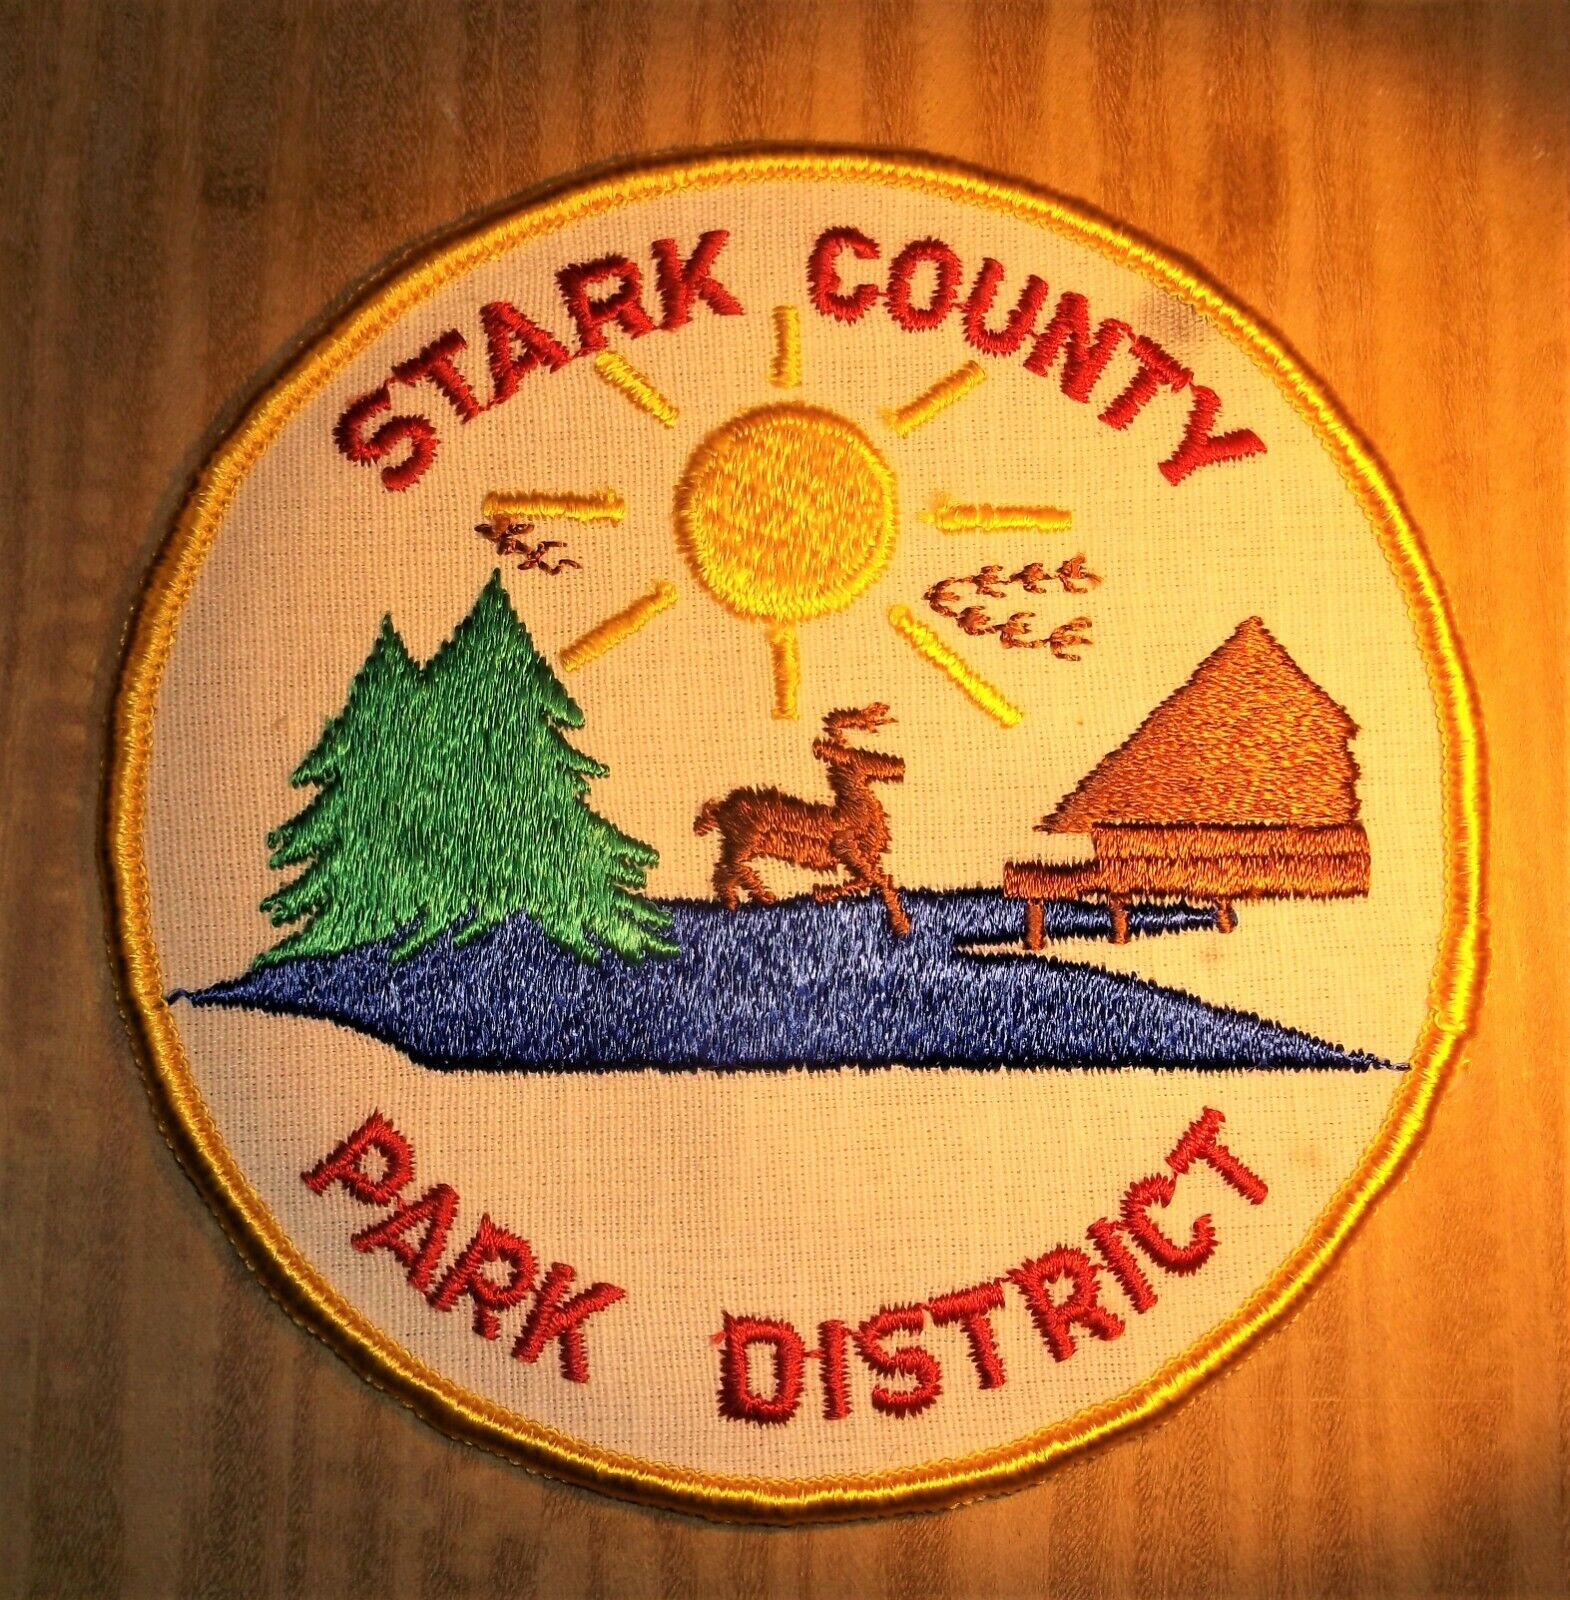 GEMSCO NOS Vintage Patch STARK COUNTY PARK DISTRICT & Erie Canalway OH - 1980